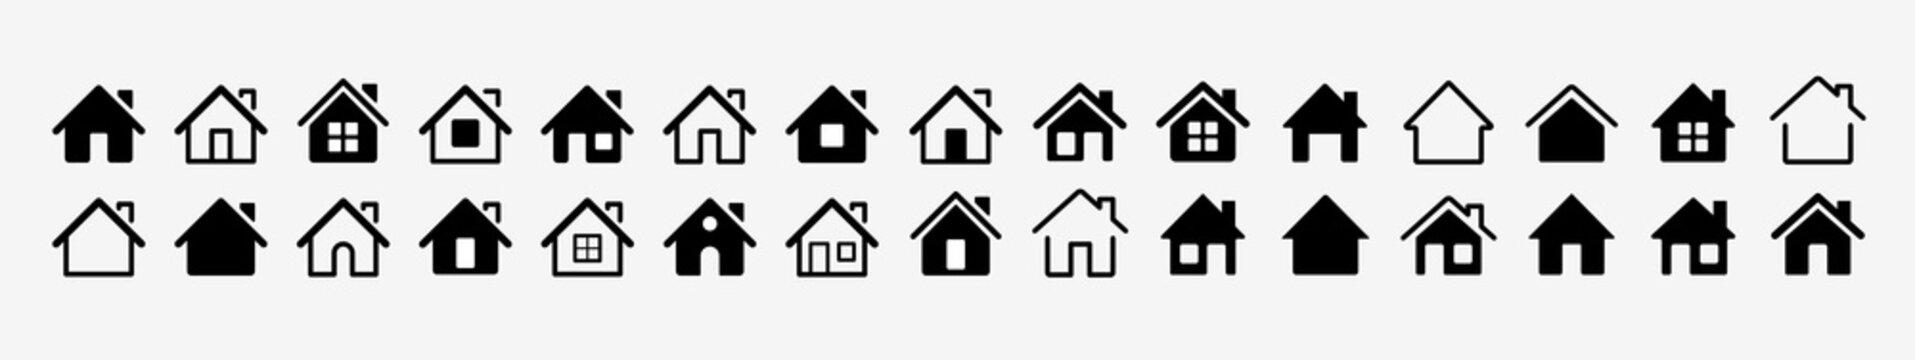 Home icon set. Home flat icon set vector illustration. Web home icon for apps and websites. Collection home icons. House symbol. Set of real estate objects and houses black icons. Vector illustration